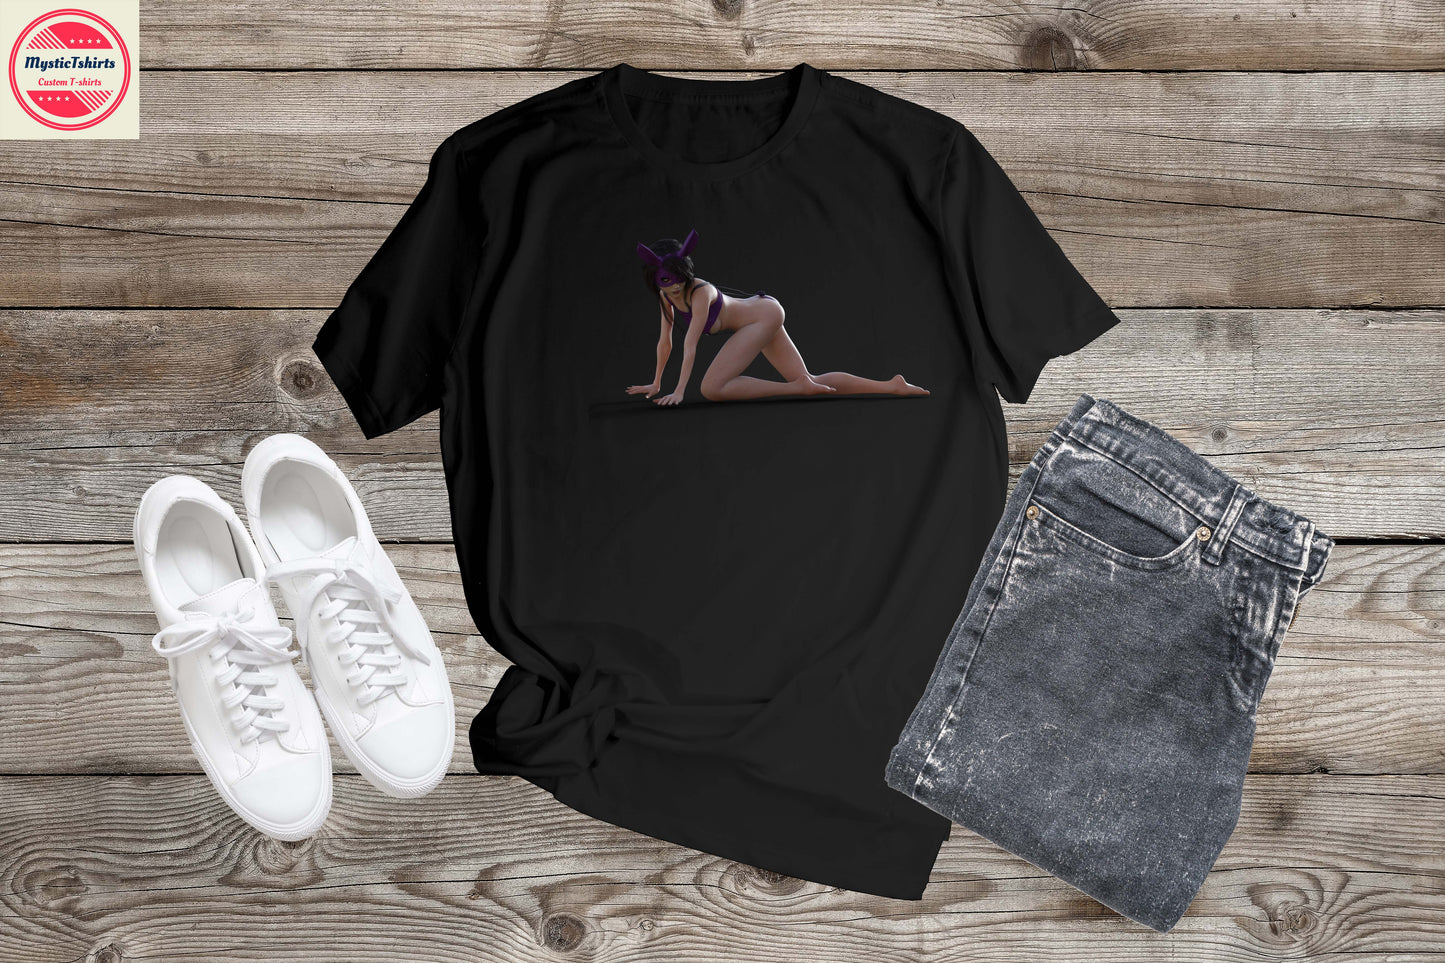 421. SEXY LADY, Custom Made Shirt, Personalized T-Shirt, Custom Text, Make Your Own Shirt, Custom Tee